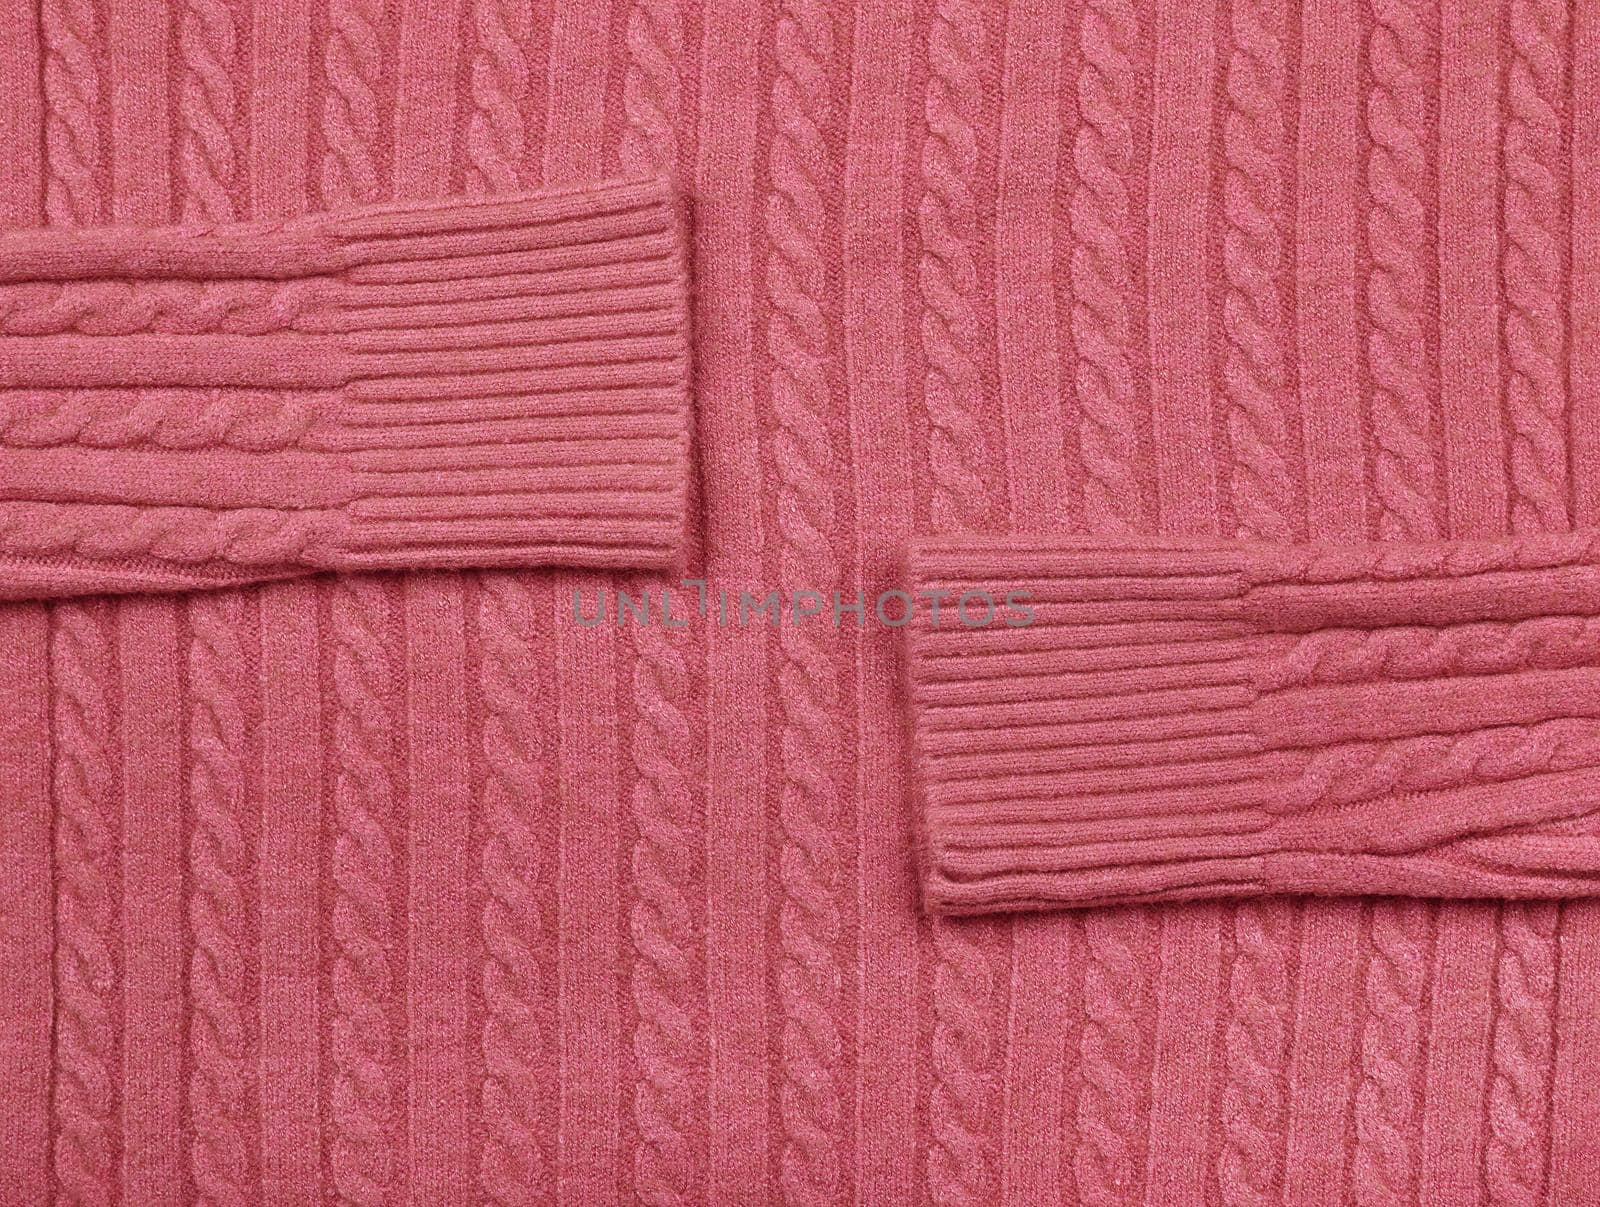 Close up background texture of pink cable knitted wool jersey fabric sweater with row braid pattern